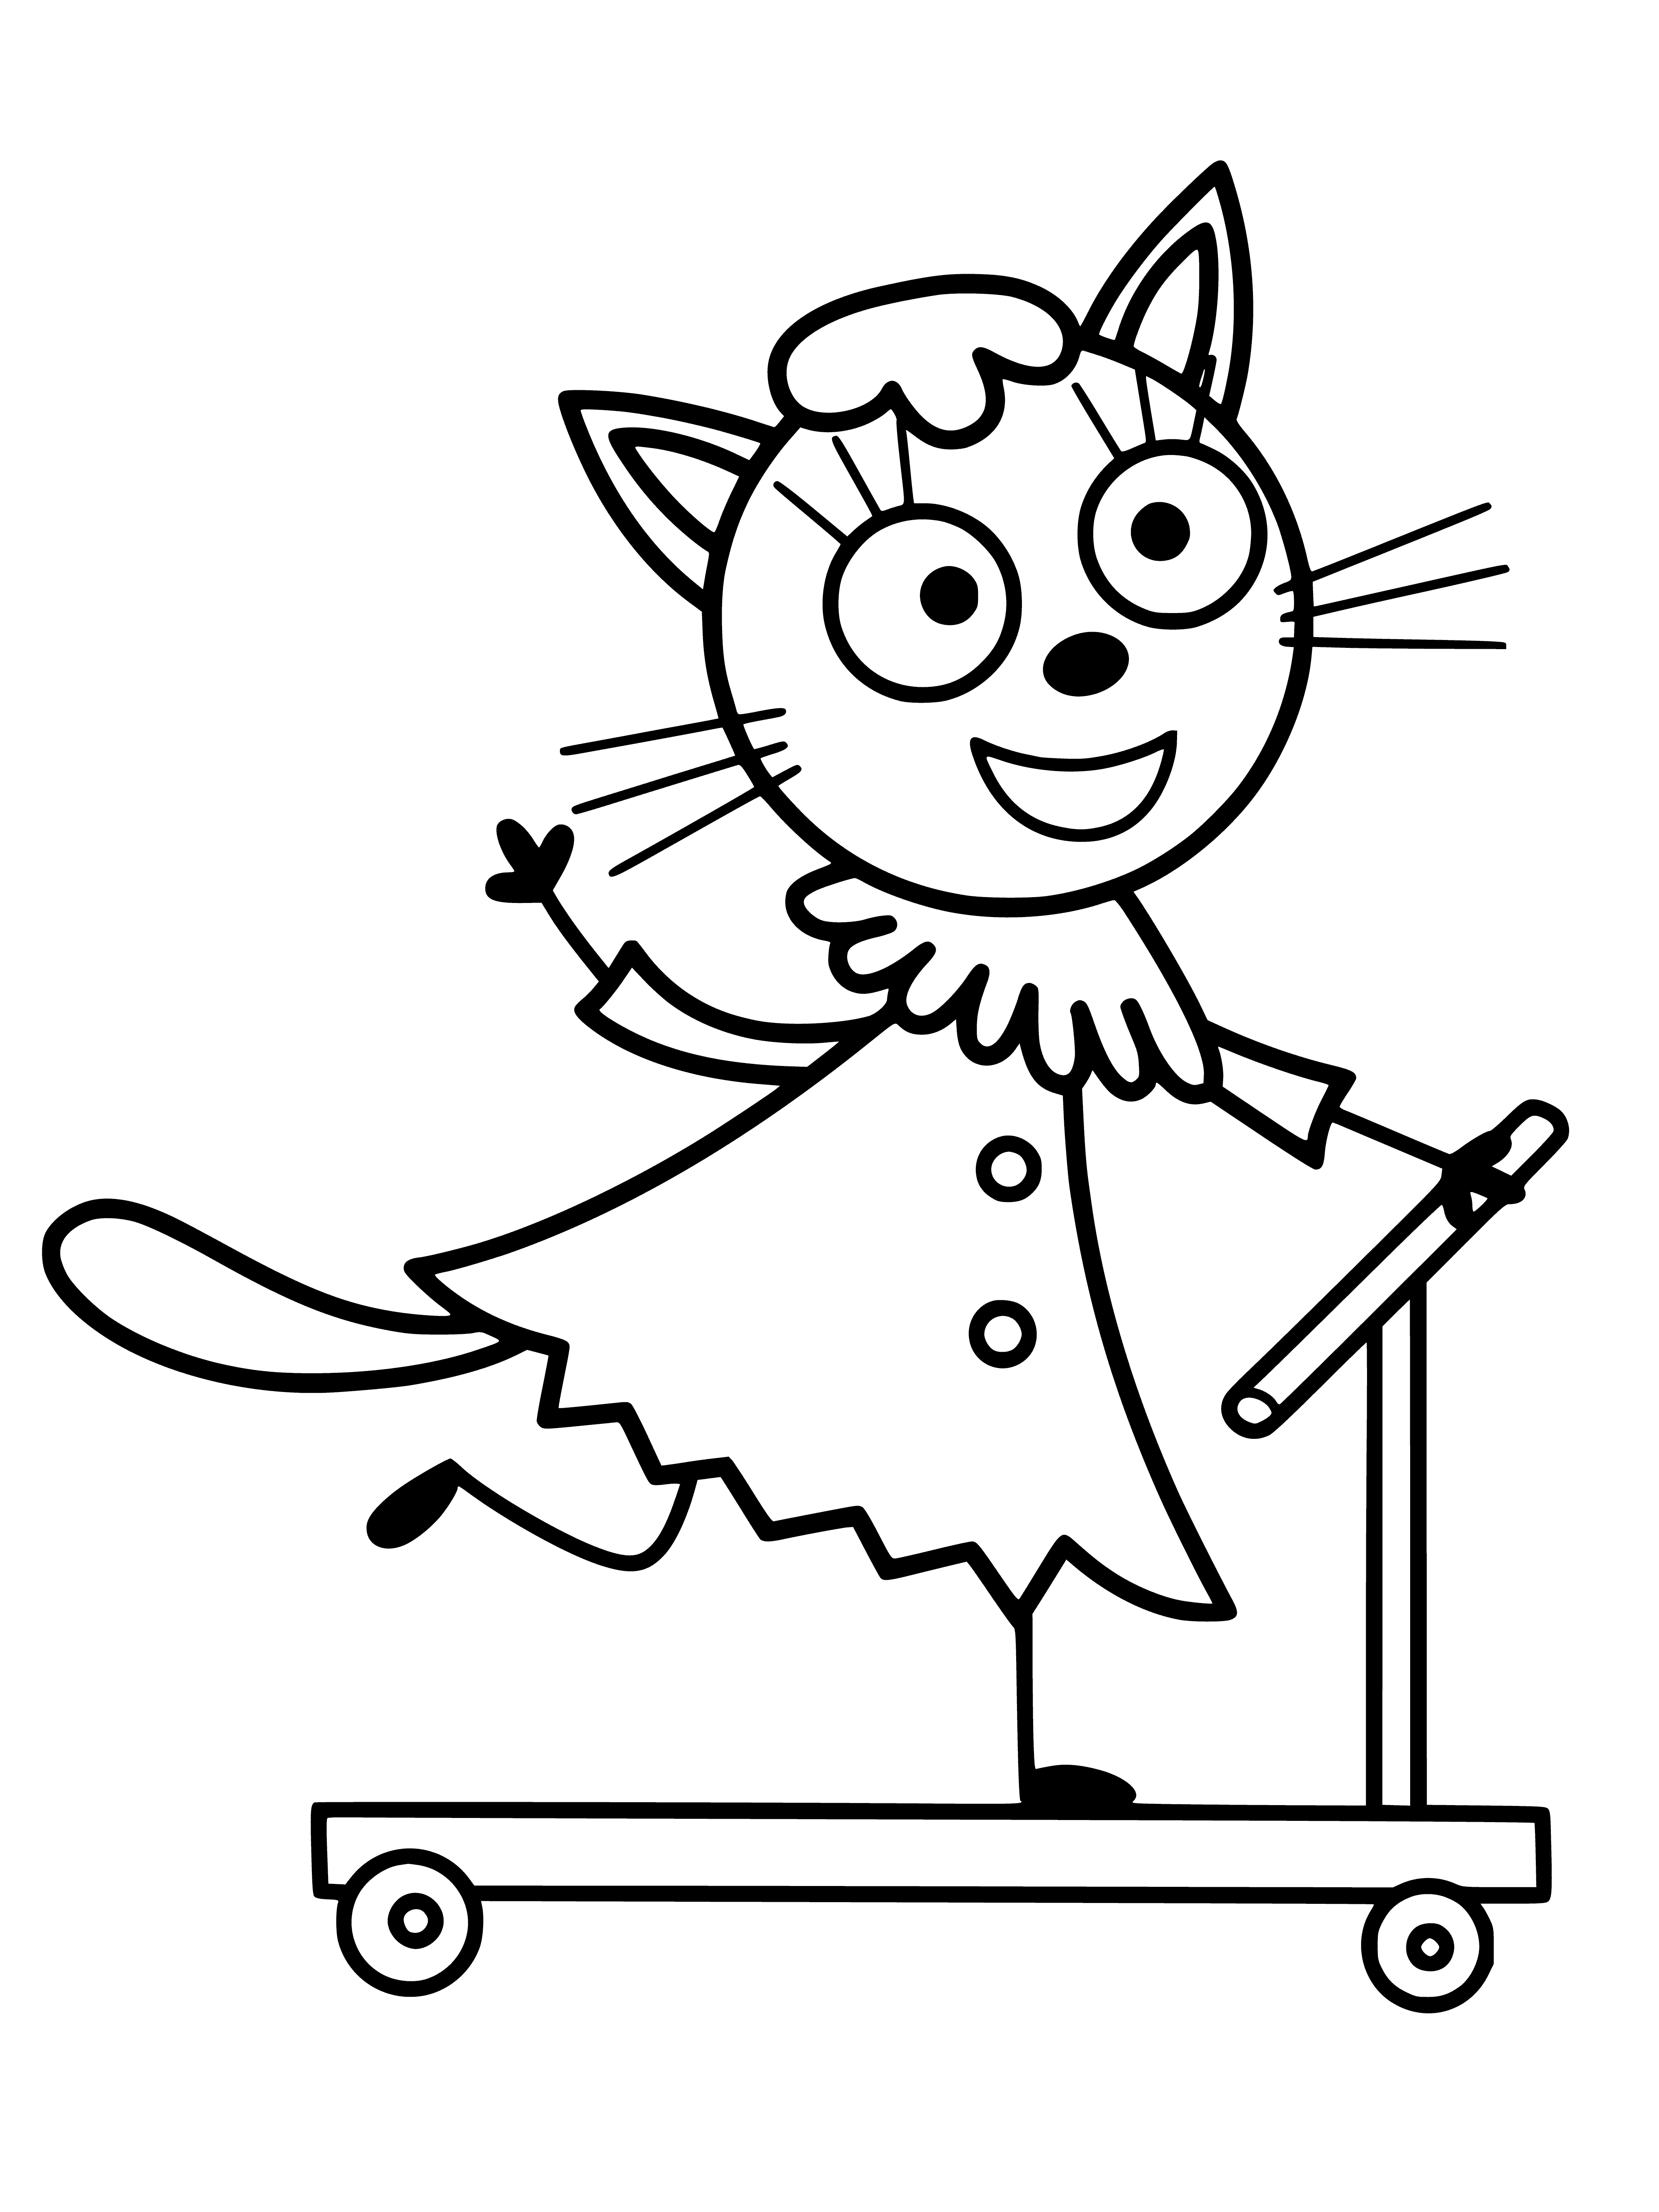 coloring page: Three cats ride a purple scooter, two gray and white, one black and white. All tails in the air!